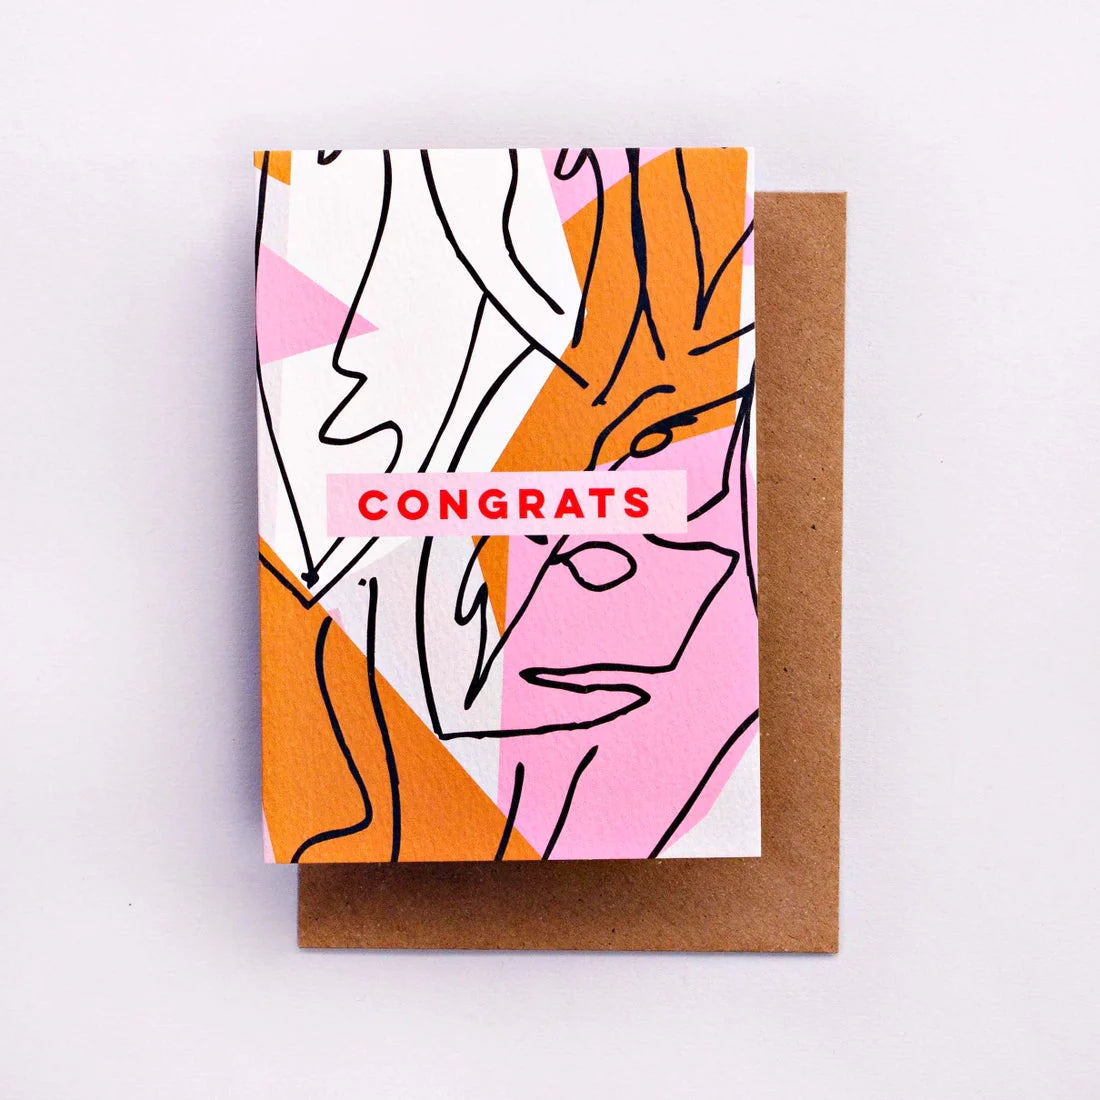 Congrats Card in Colourful Graphic Cards The Completist